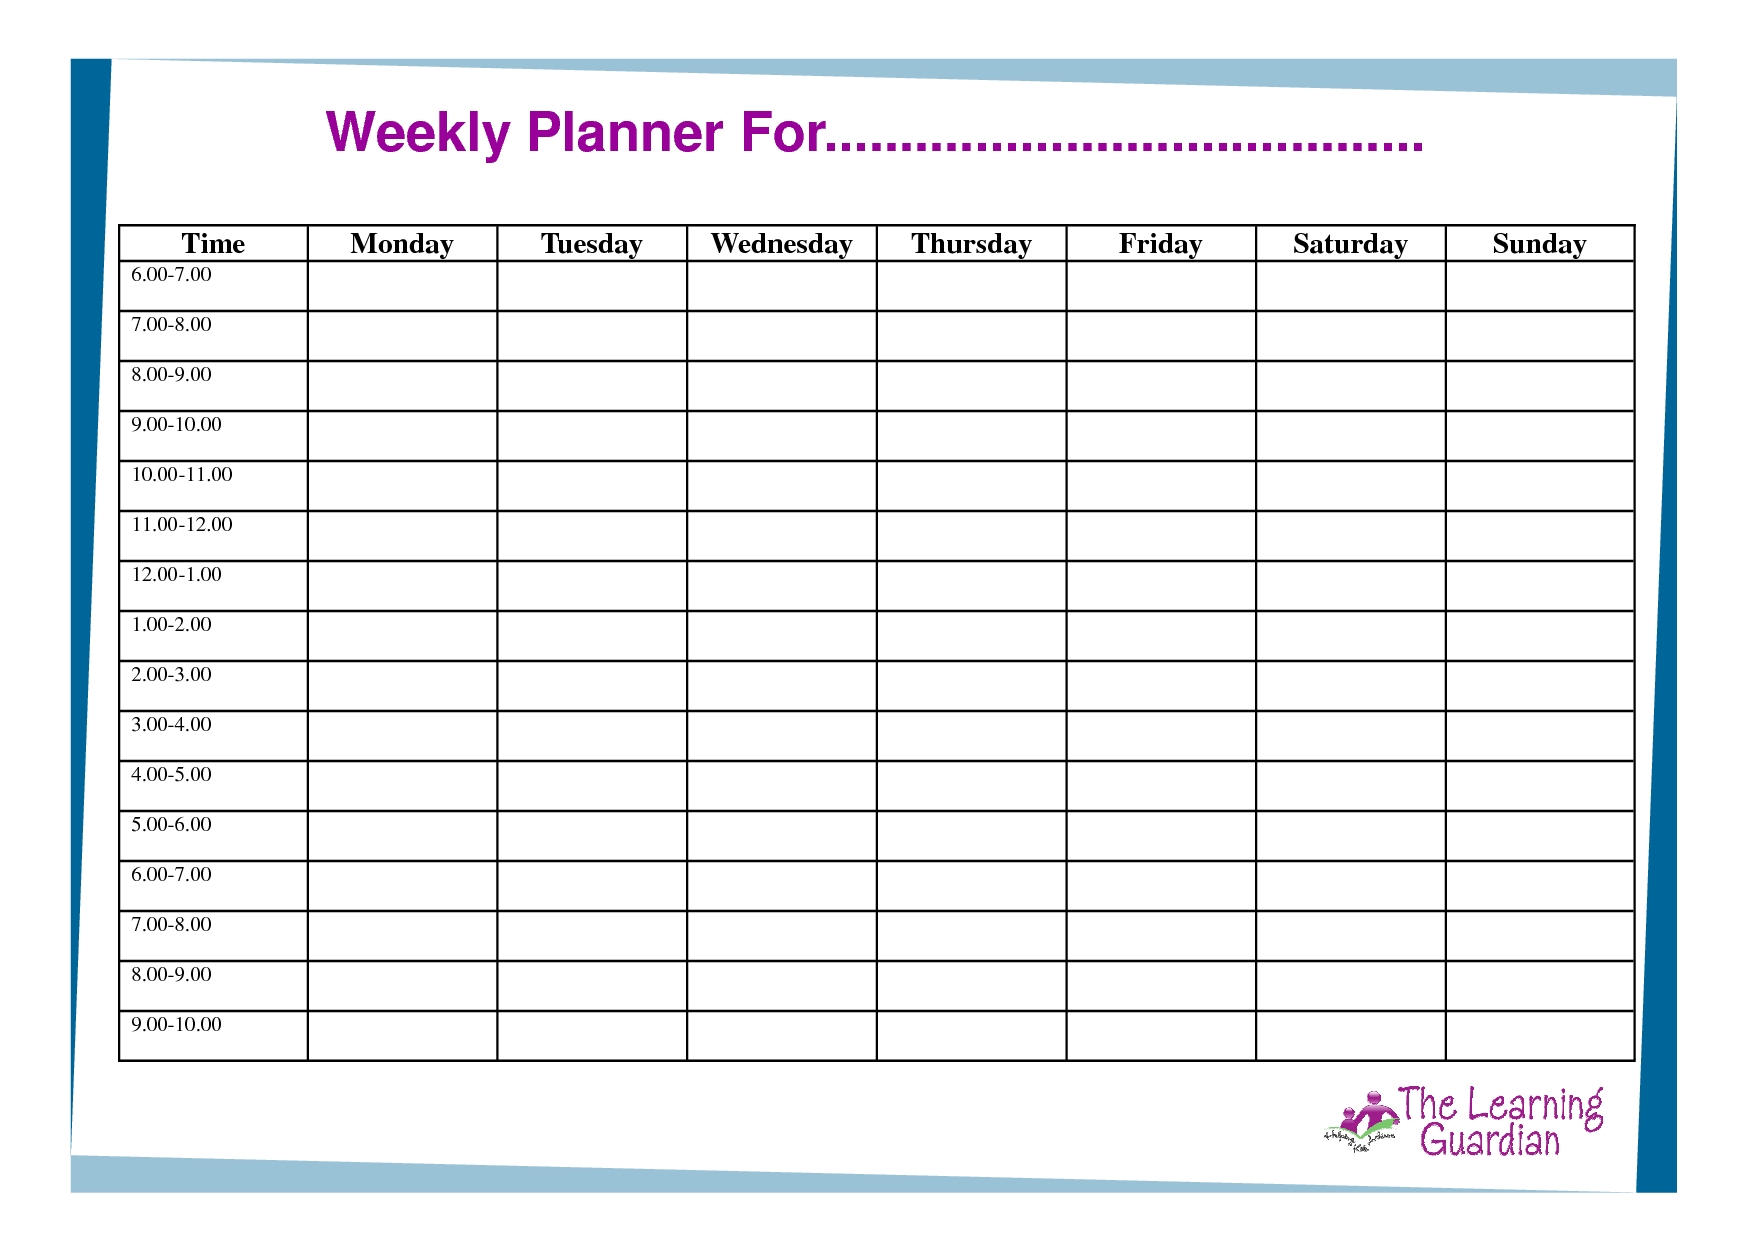 Free+Printable+Weekly+Planner+Templates In 2020 | Weekly with One Week Calendar With Hours